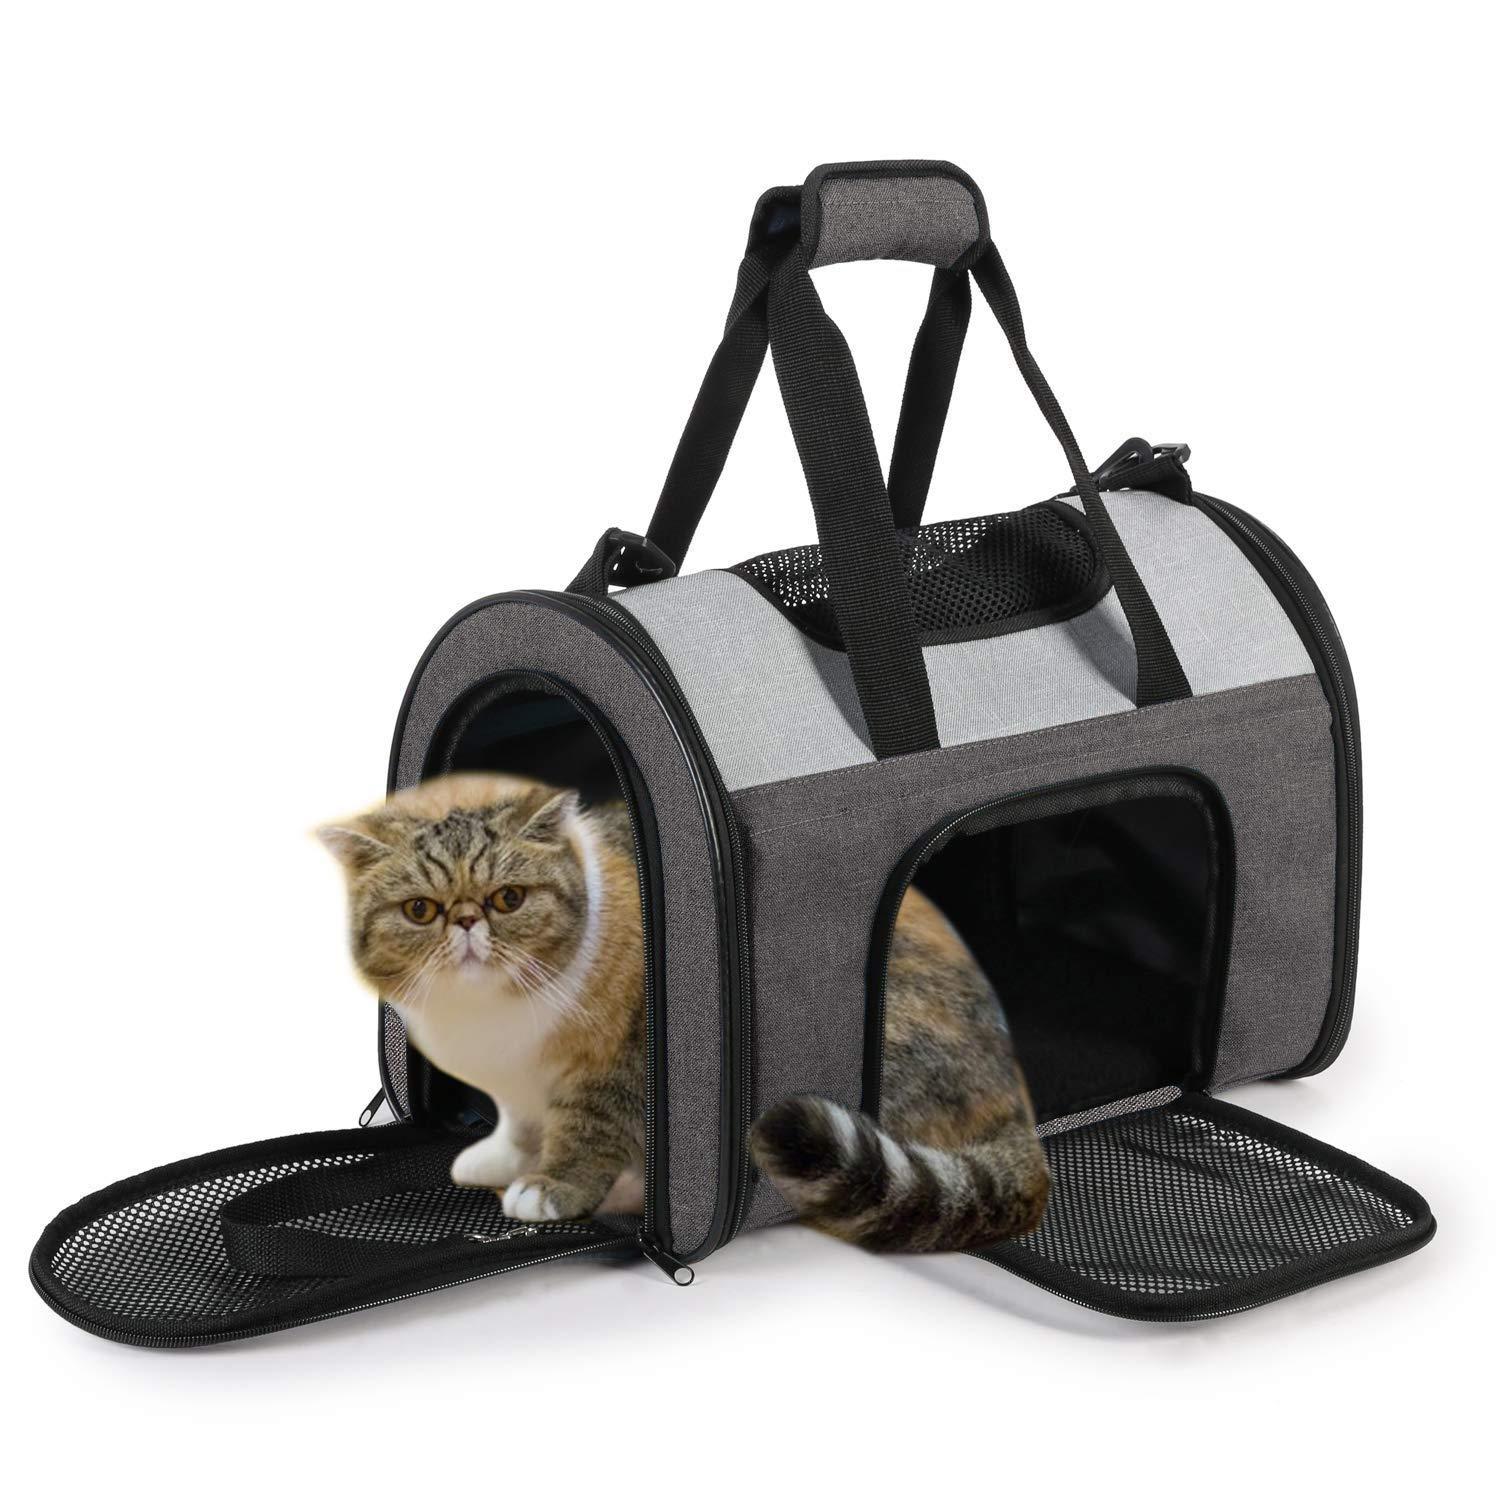 Buy Prutapet Large Cat Carrier 24x16.5x16.5 Soft-Sided Portable